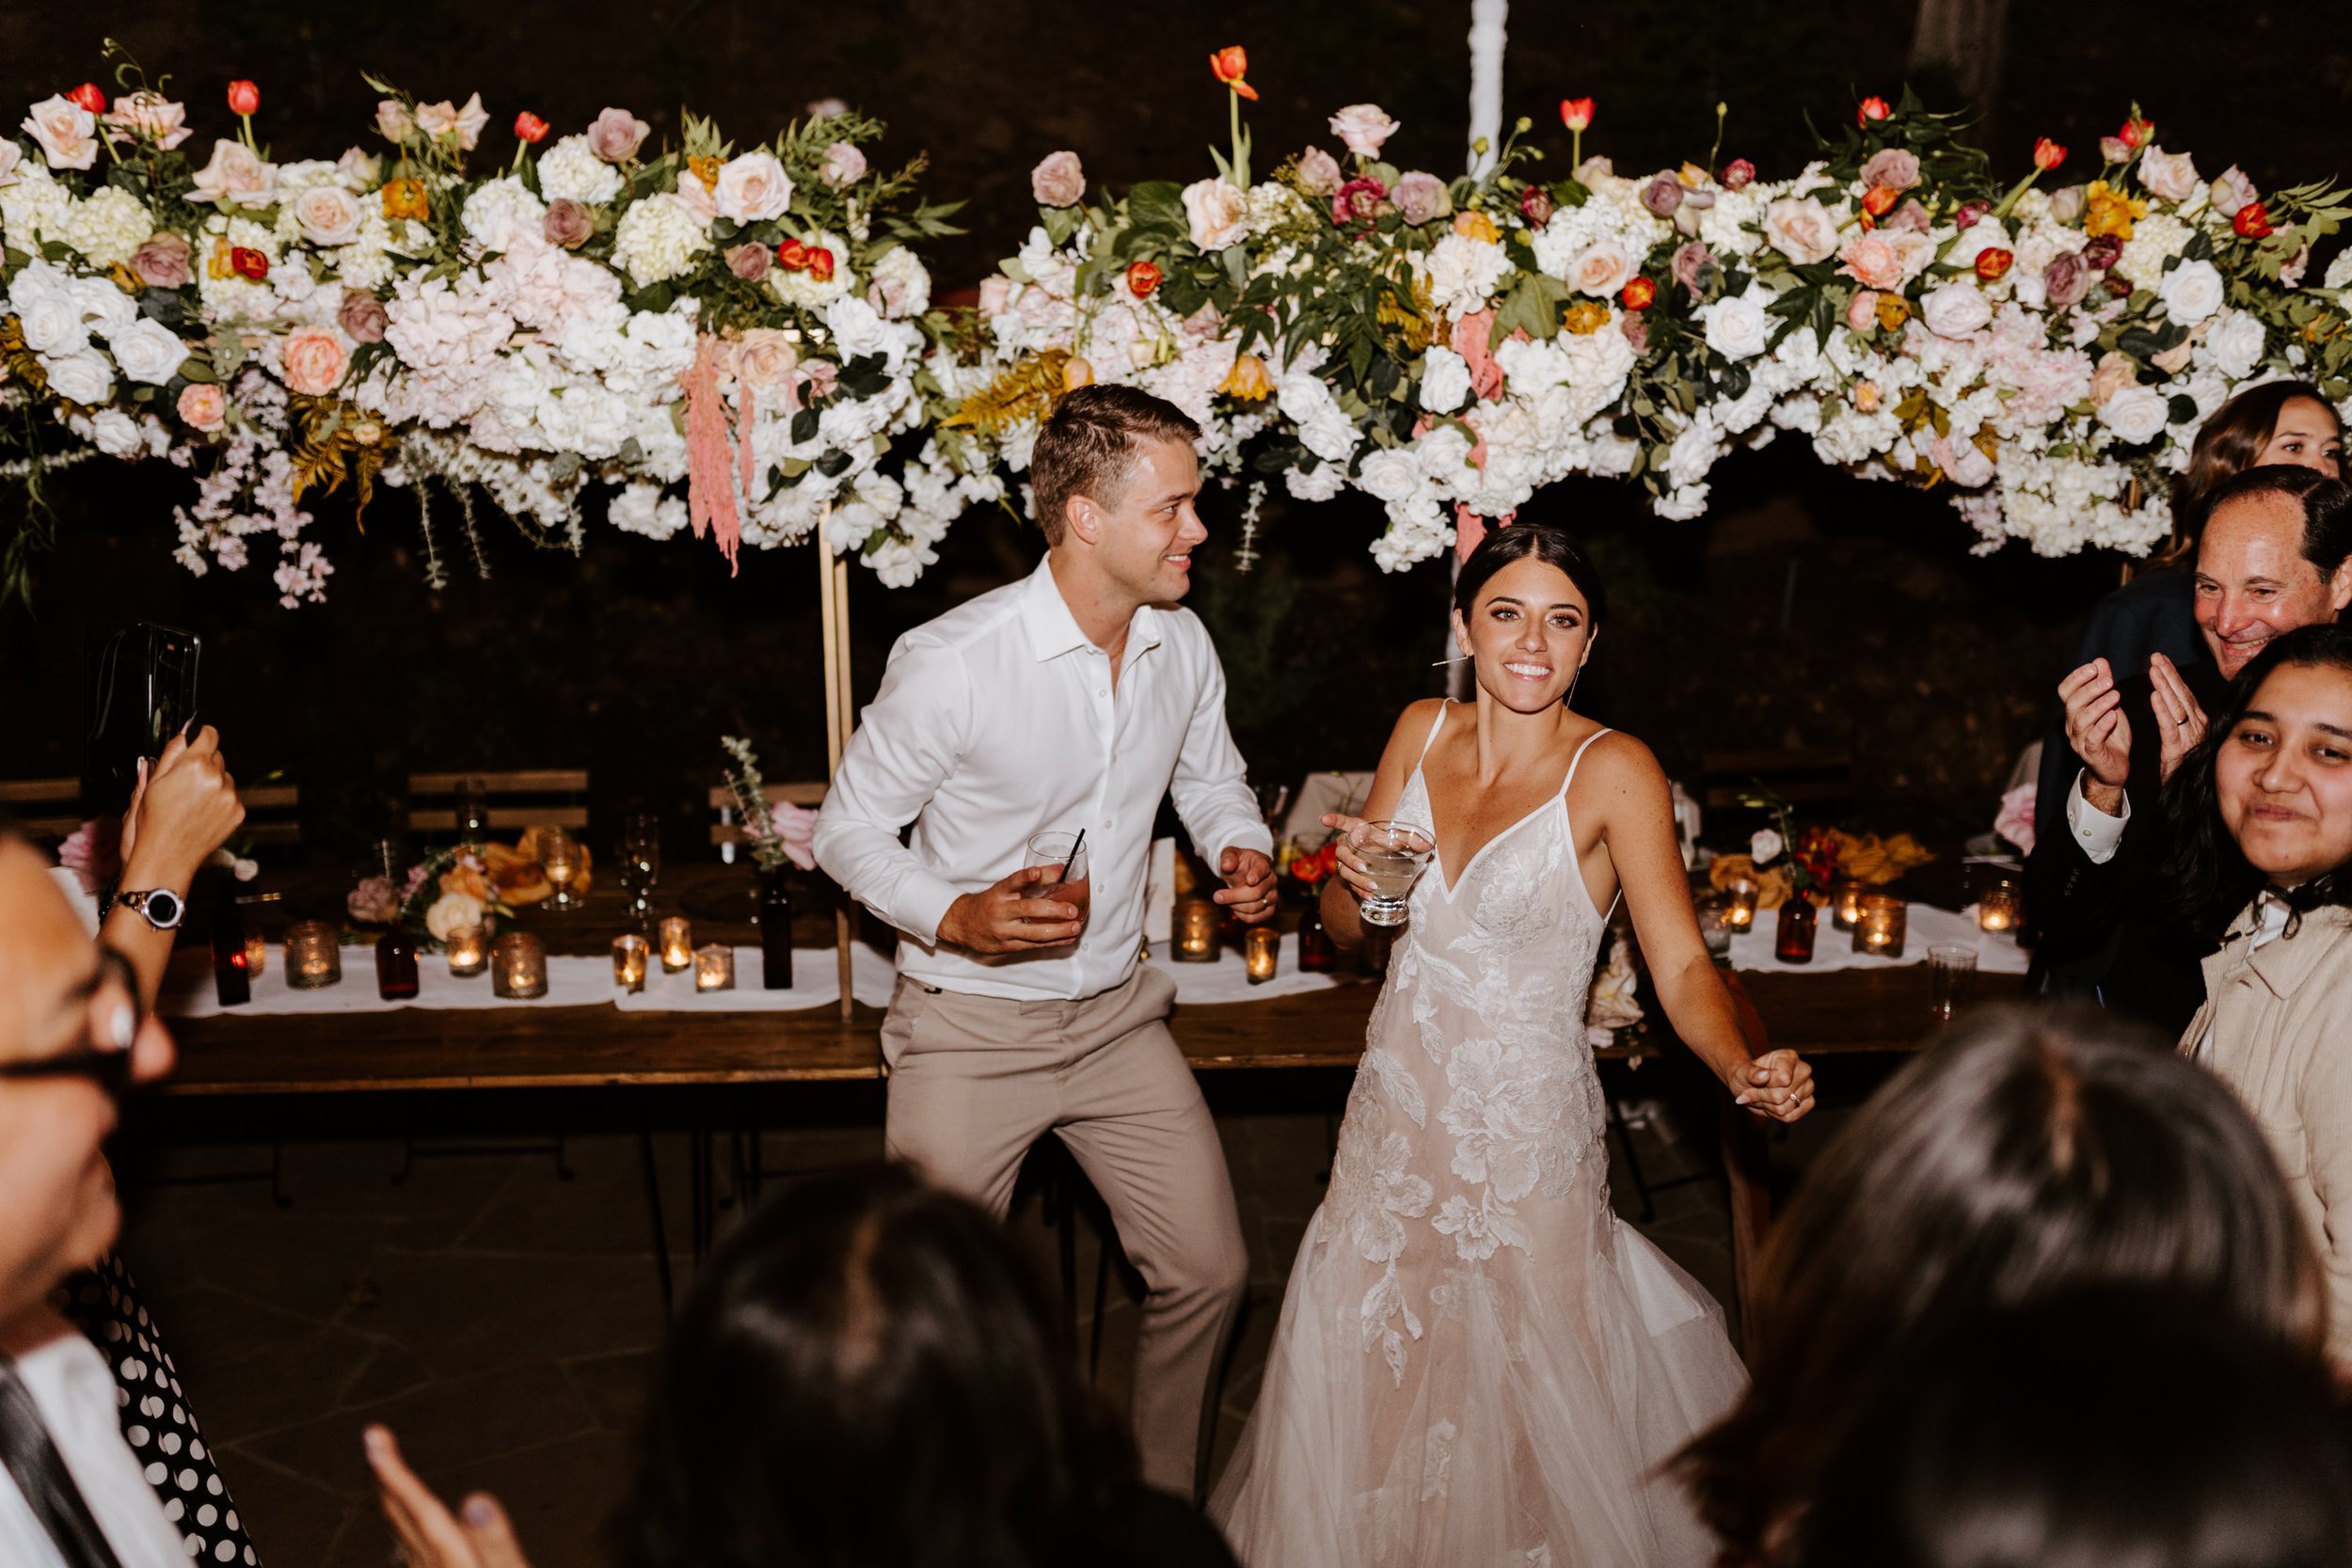 Fun candid dancing wedding reception photography, Castle in the Forest Lake Arrowhead airbnb wedding, Photo by Tida Svy